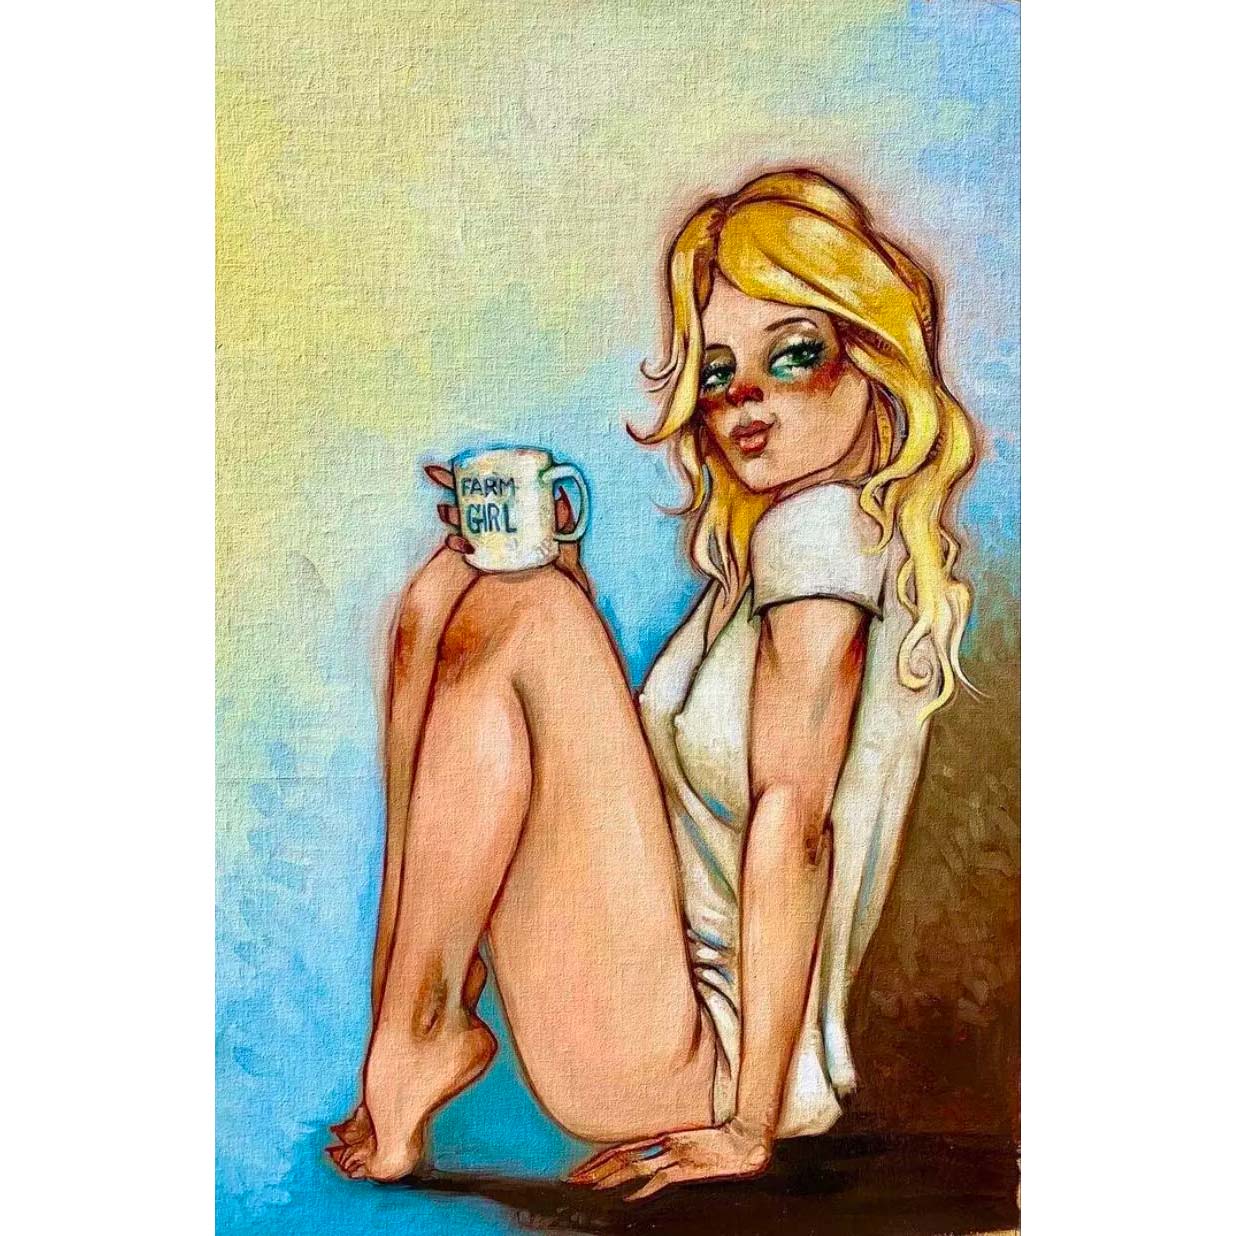 Todd White "Farm Girl" Limited Edition Canvas Giclee